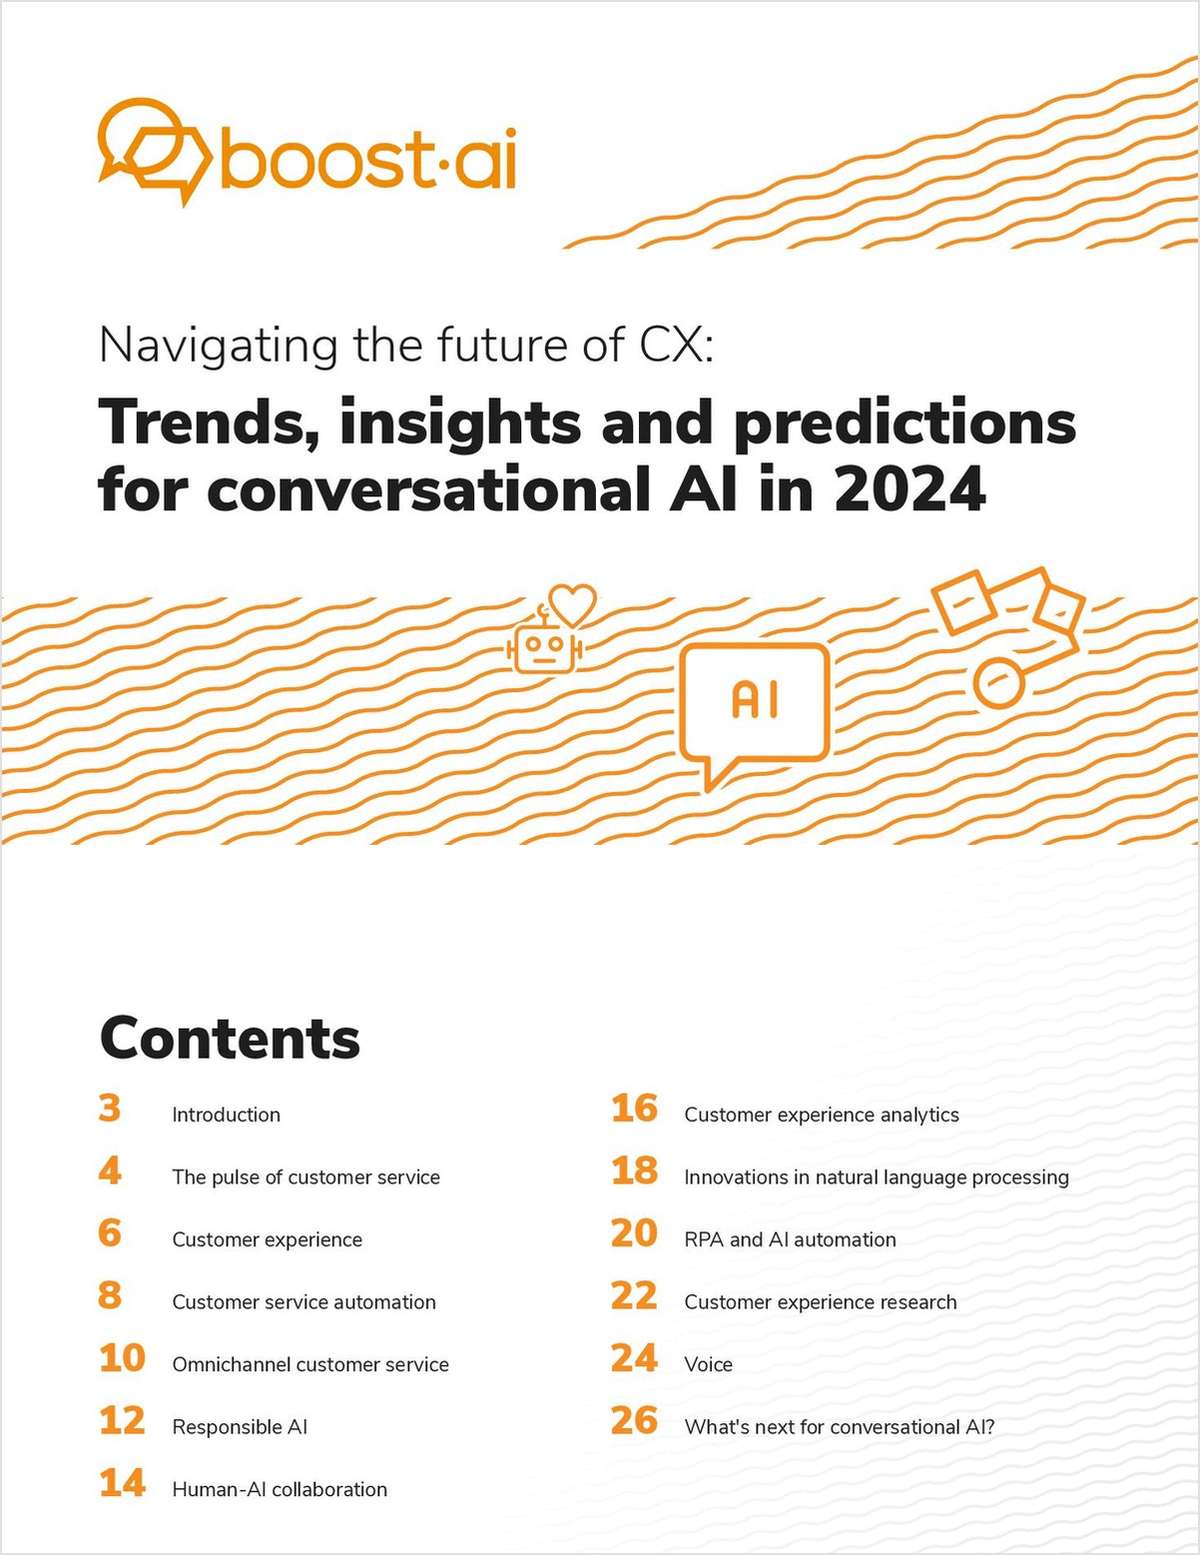 The Future of CX: Trends, Insights and Predictions for Conversational AI in 2024 link